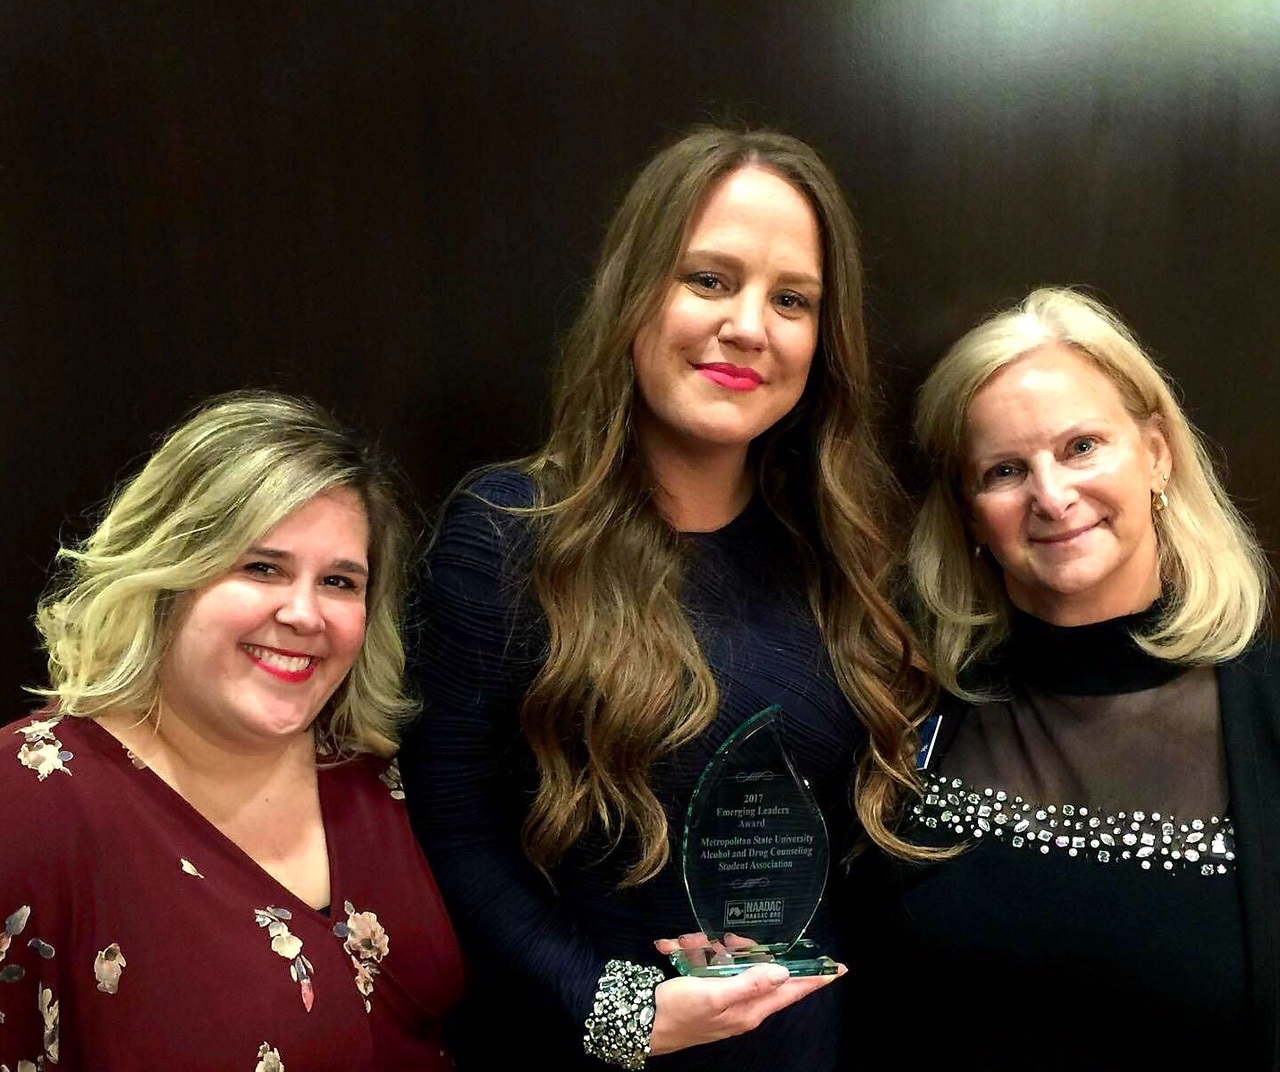 Addiction counseling students win national award